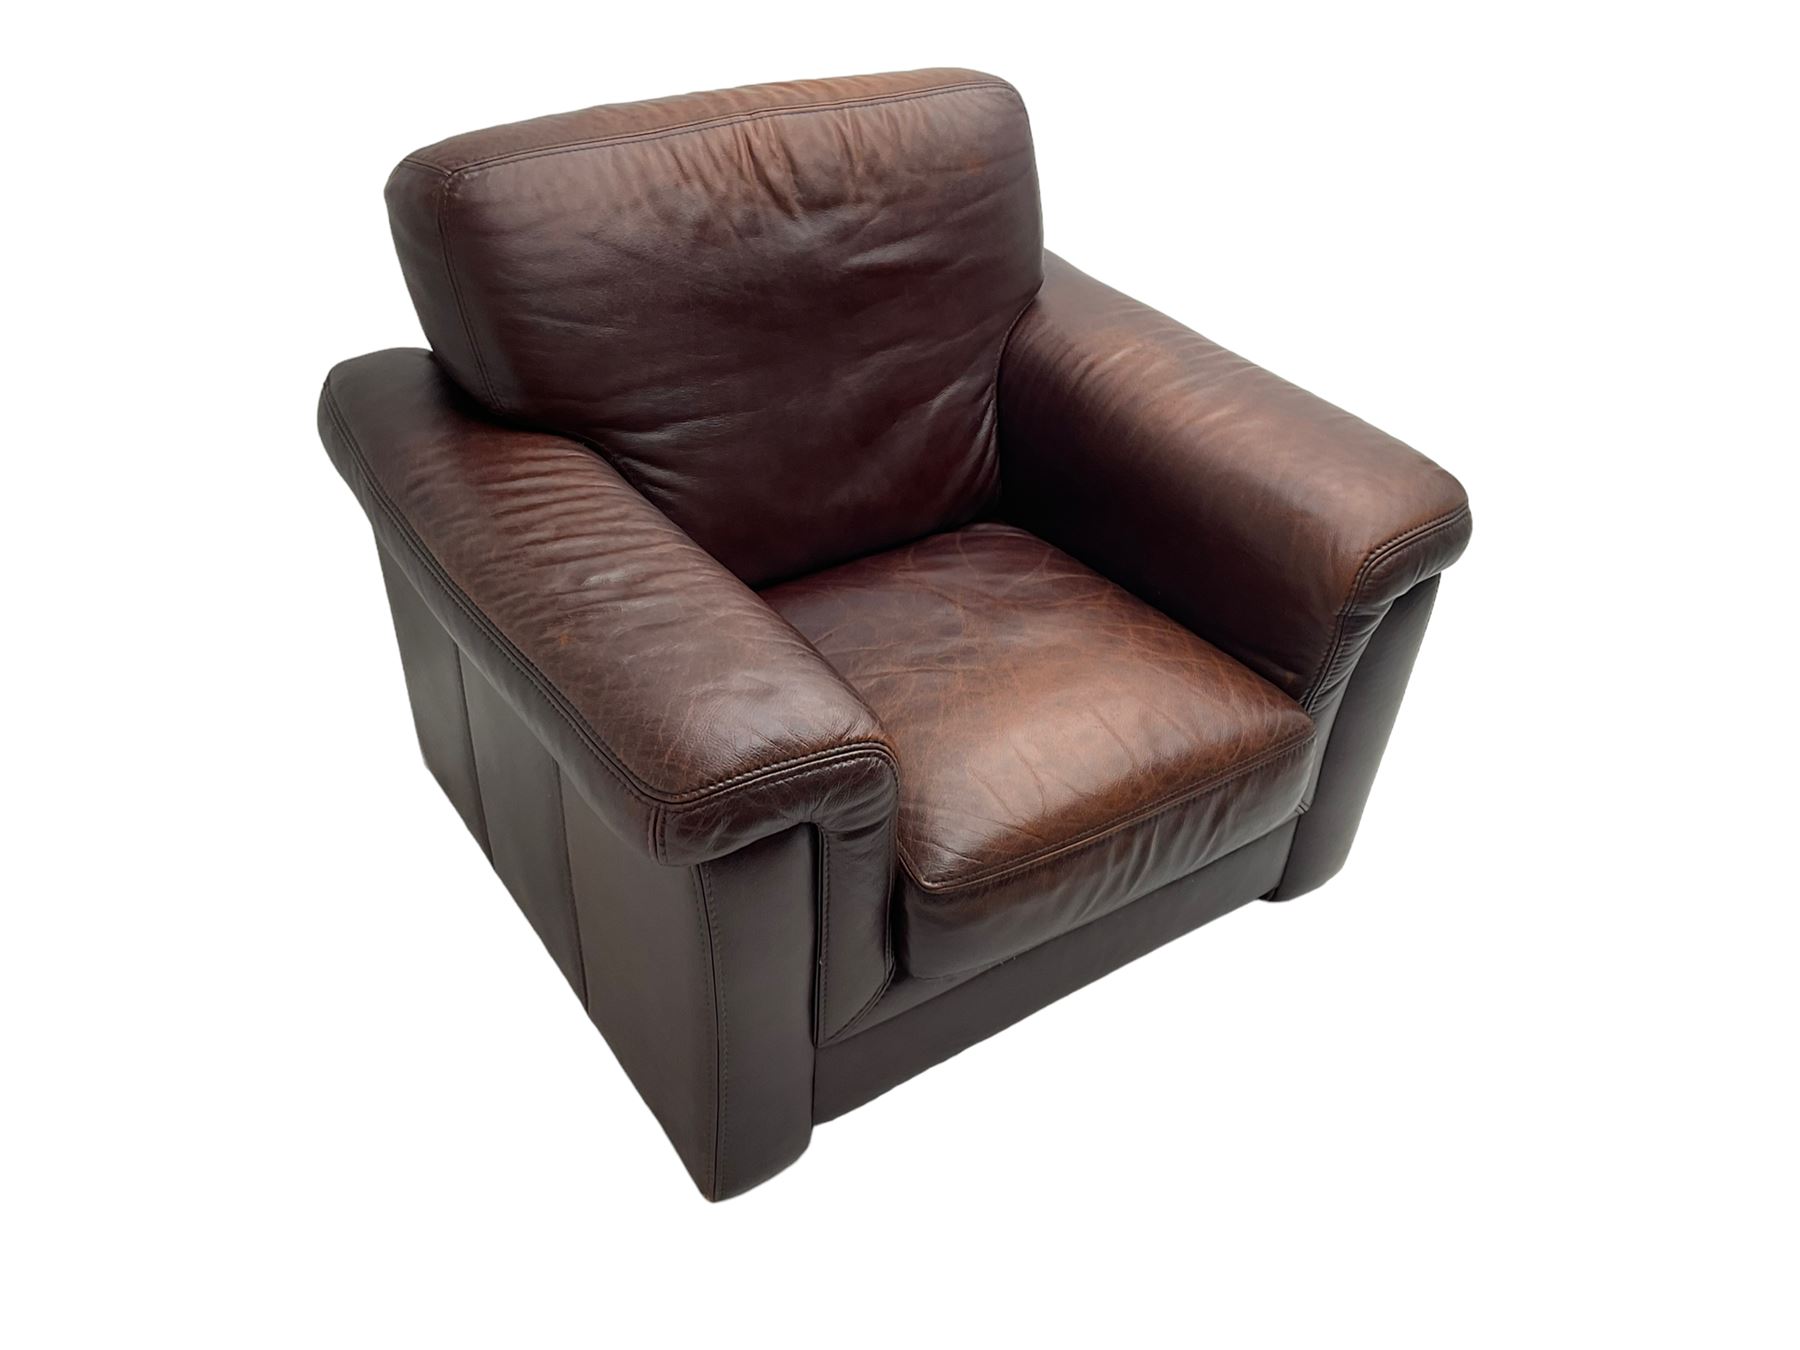 Large armchair upholstered in chocolate brown leather - Image 5 of 6